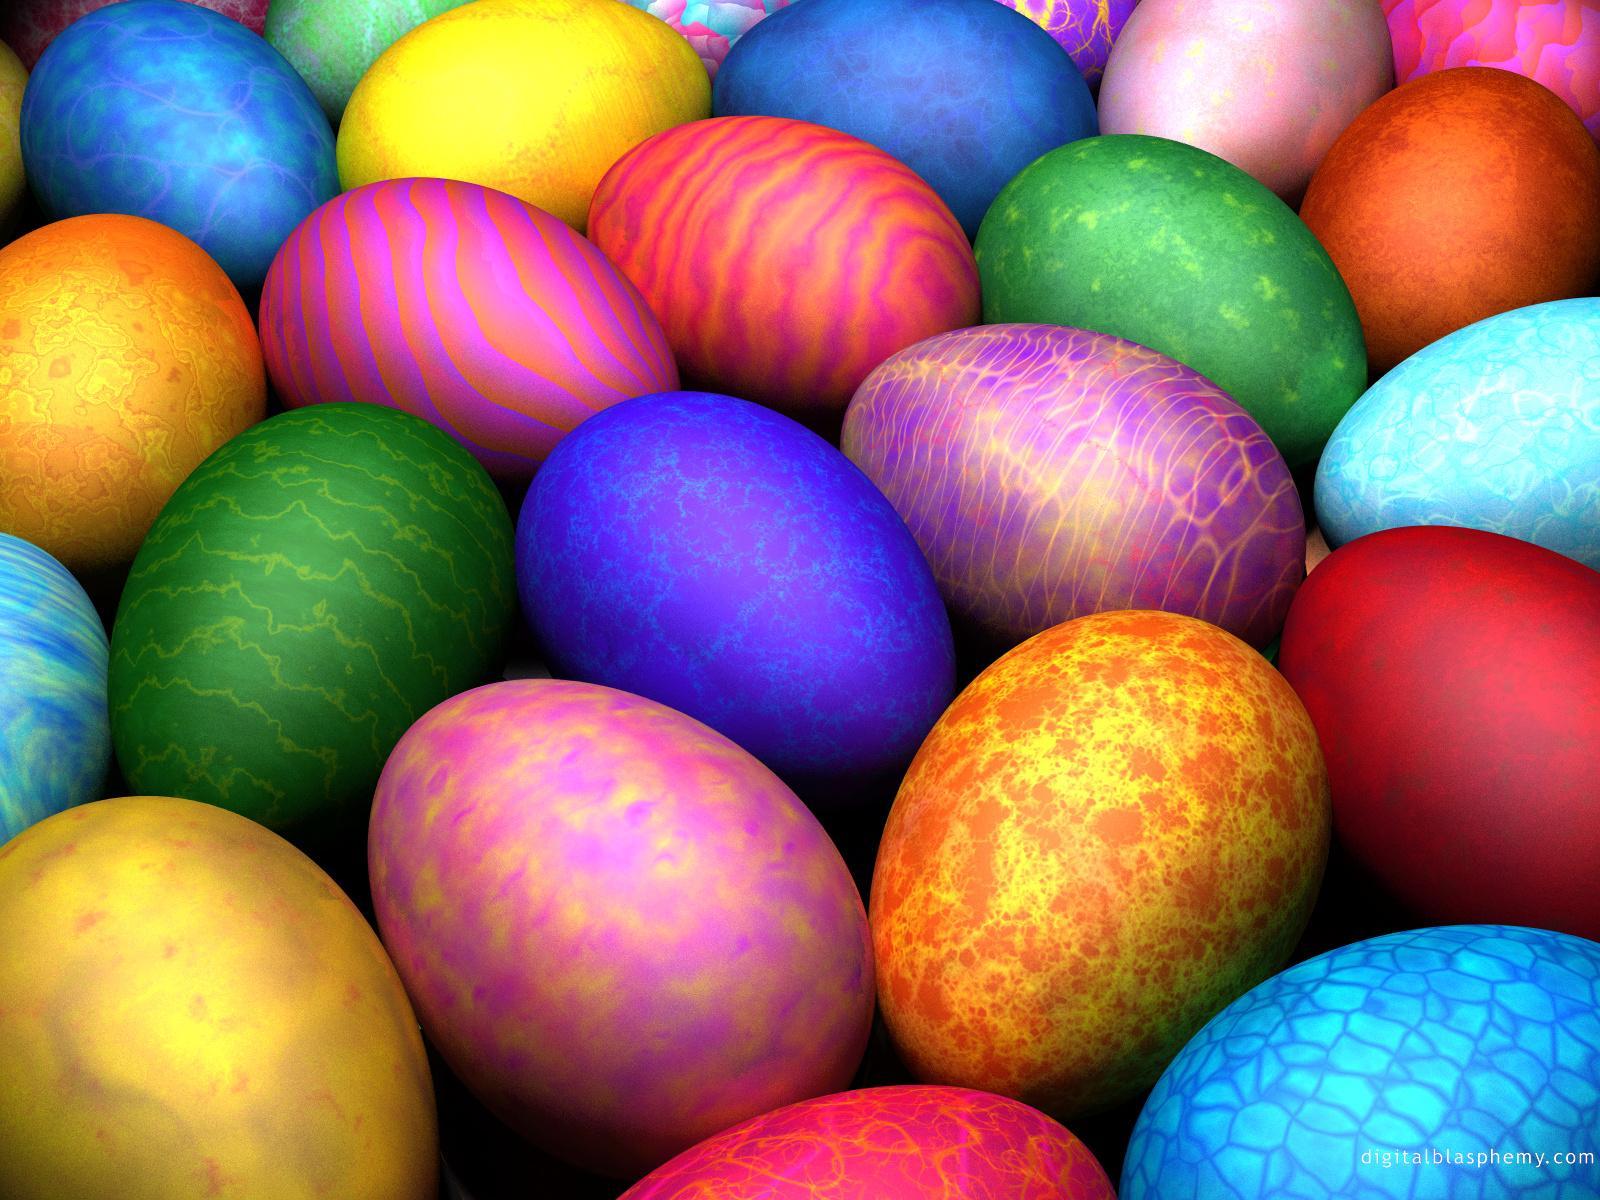 Colorful Easter Eggs Free Desktop Background Wallpaper Image 1600x1200px